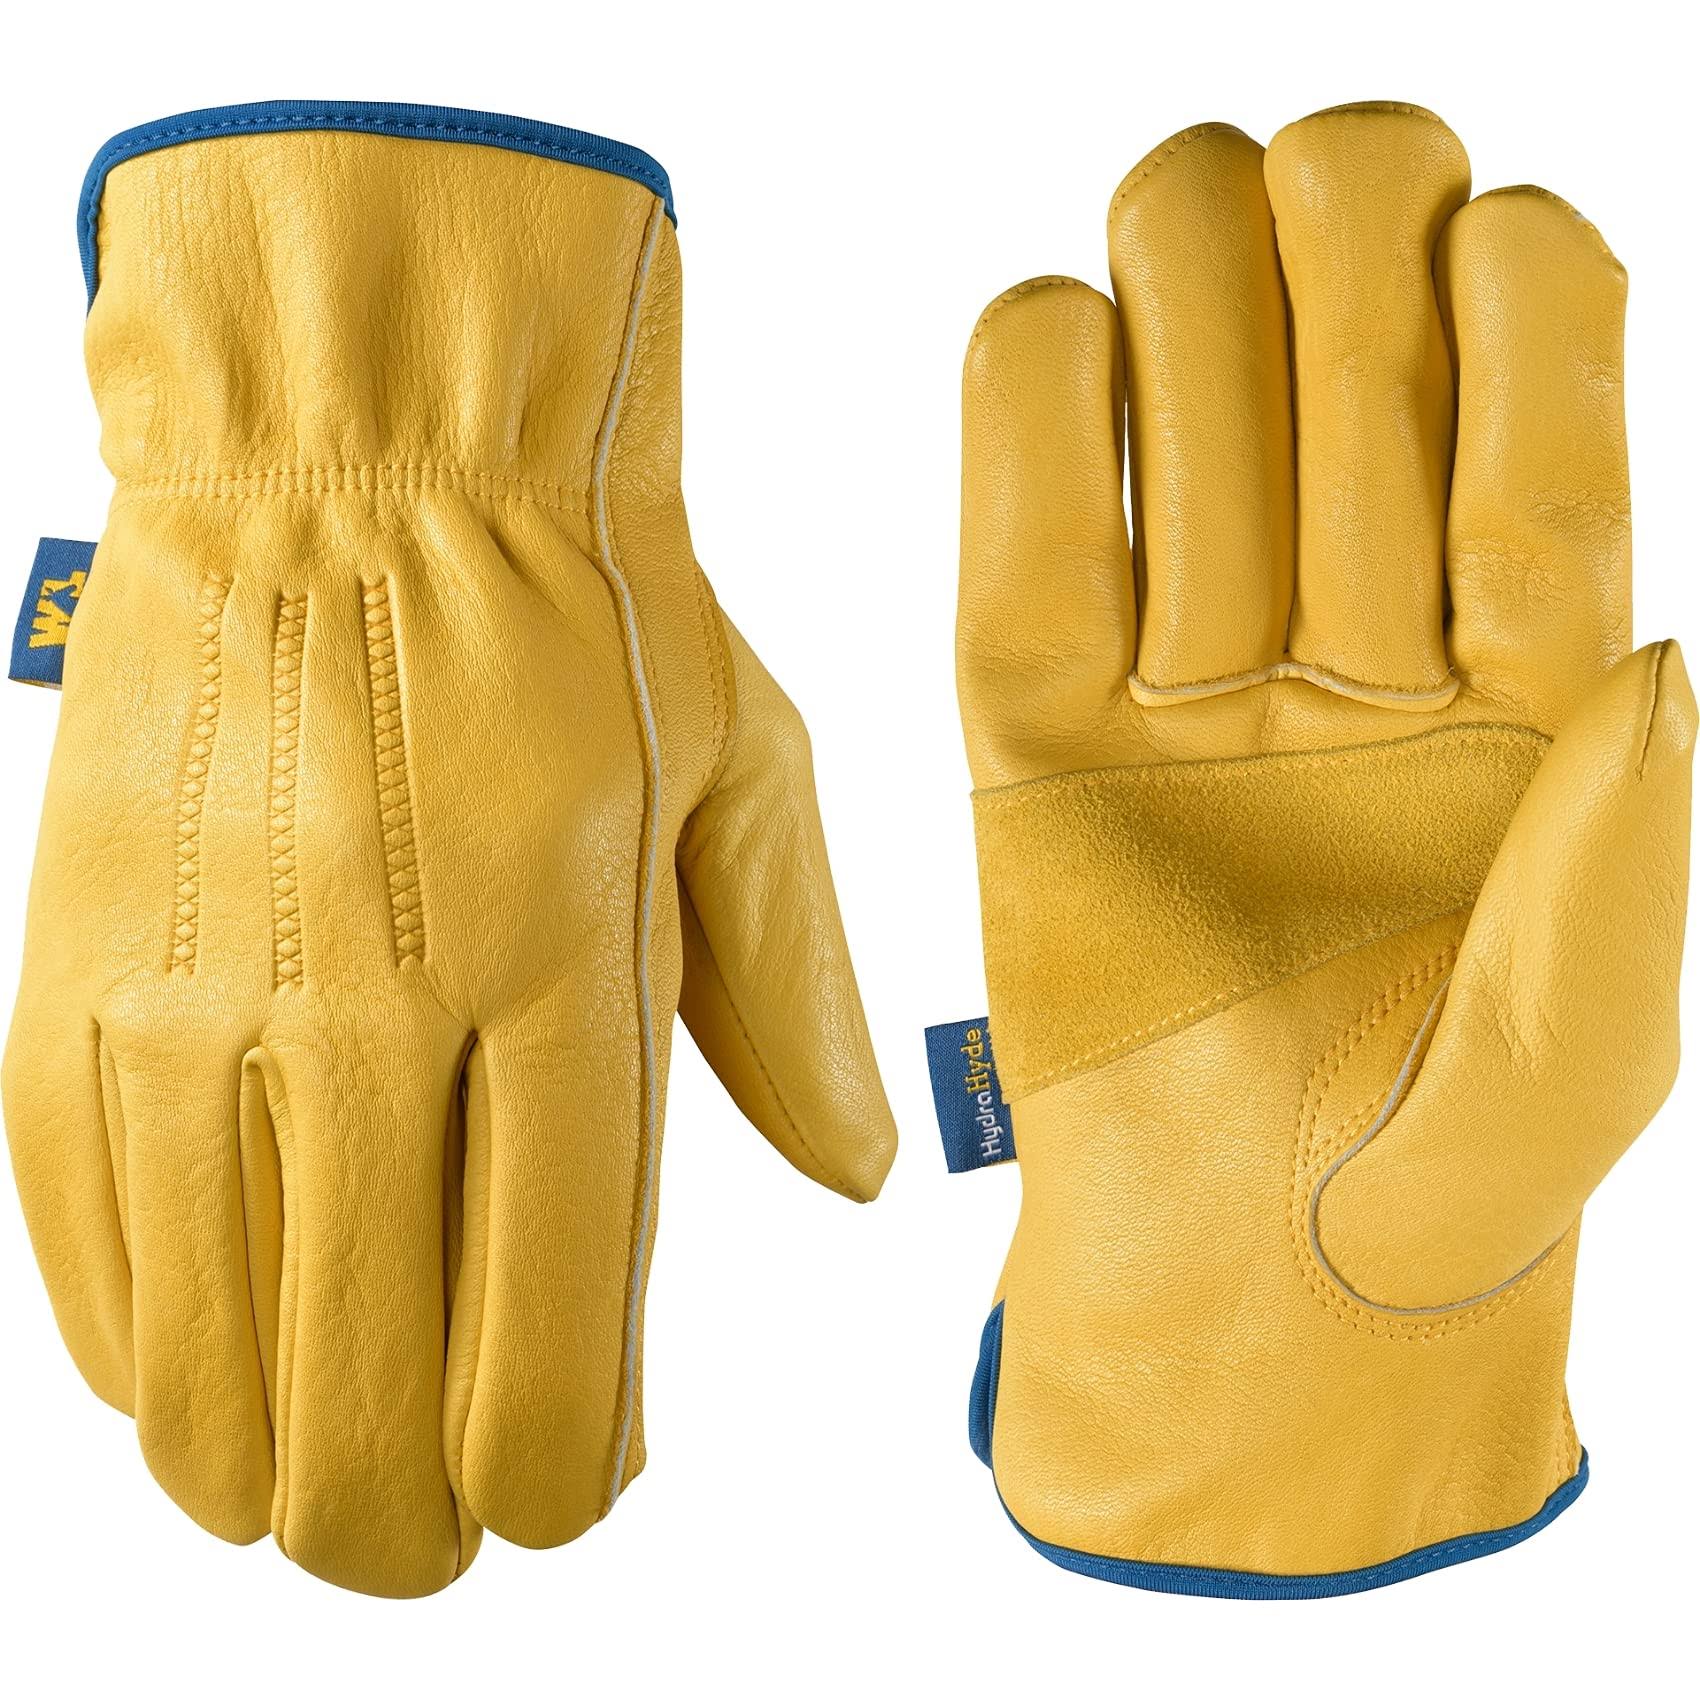 Wells Lamont 1168XL Slip-On HydraHyde Leather Work Gloves, Water-resistant, XL